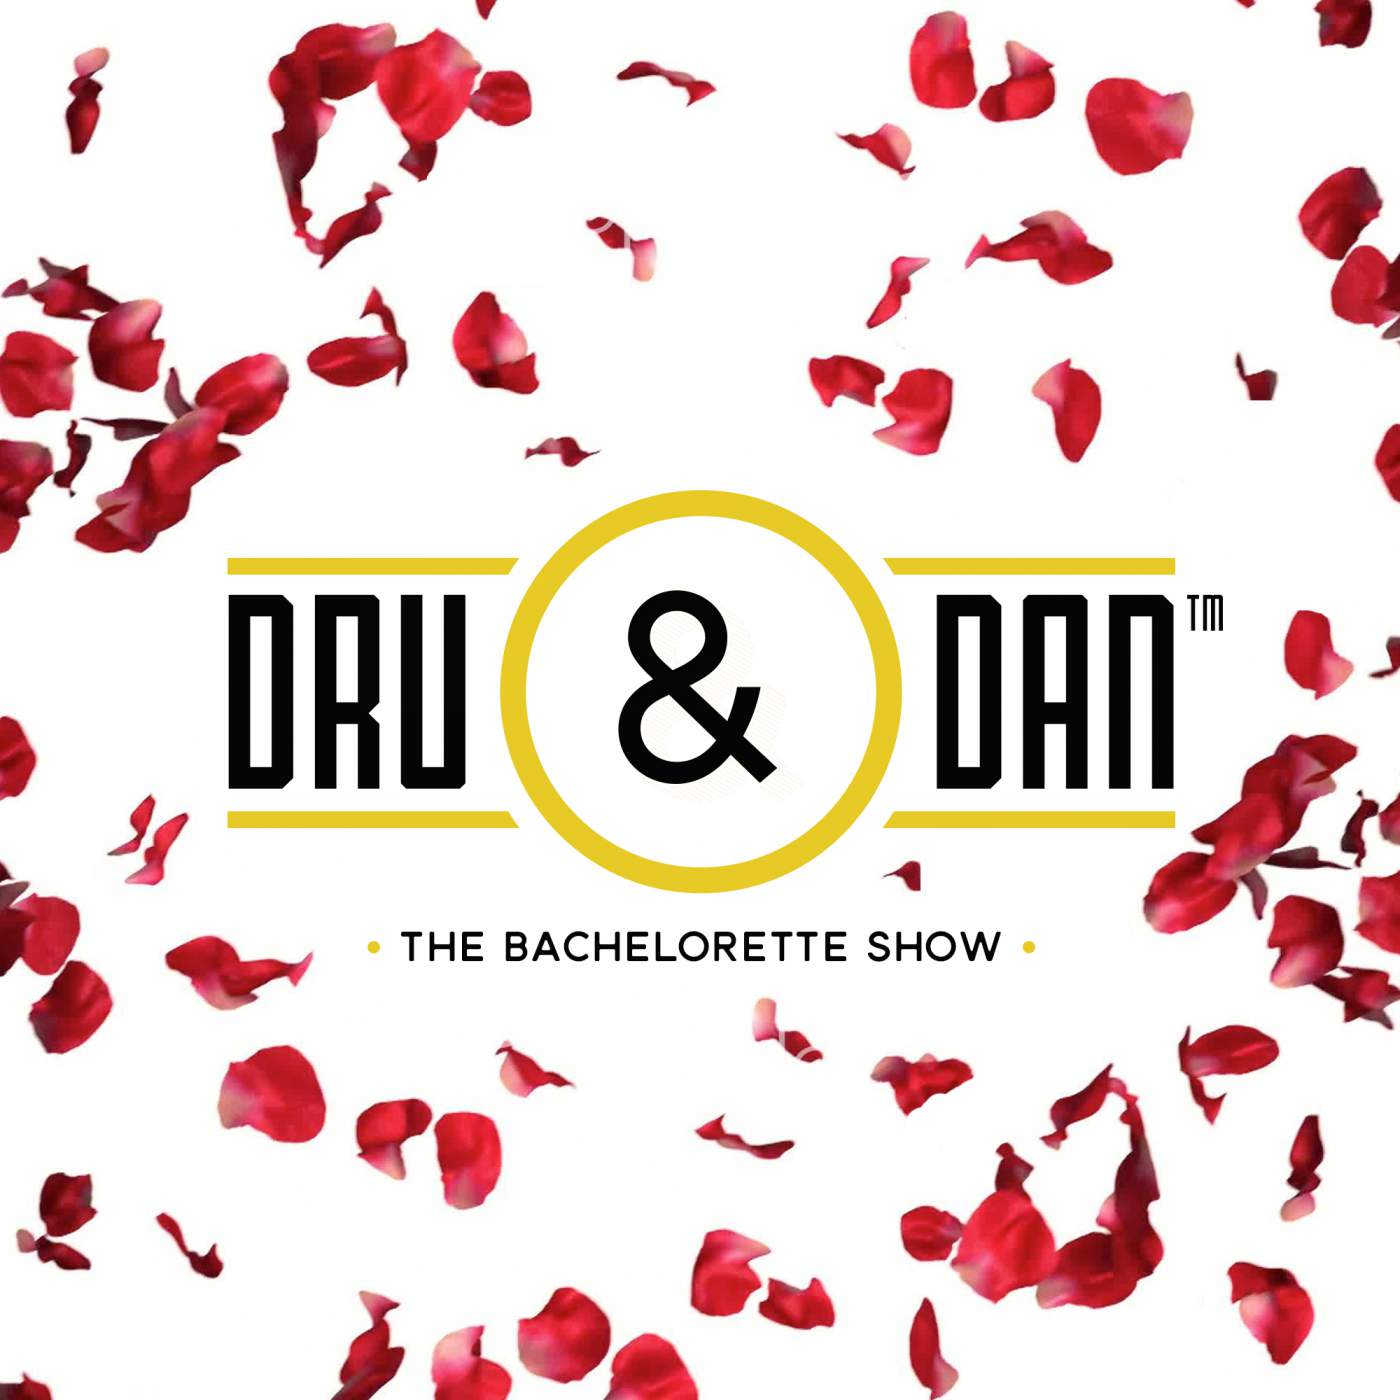 Bachelorette Episode 4, with guests Rachael & Devin Woolley